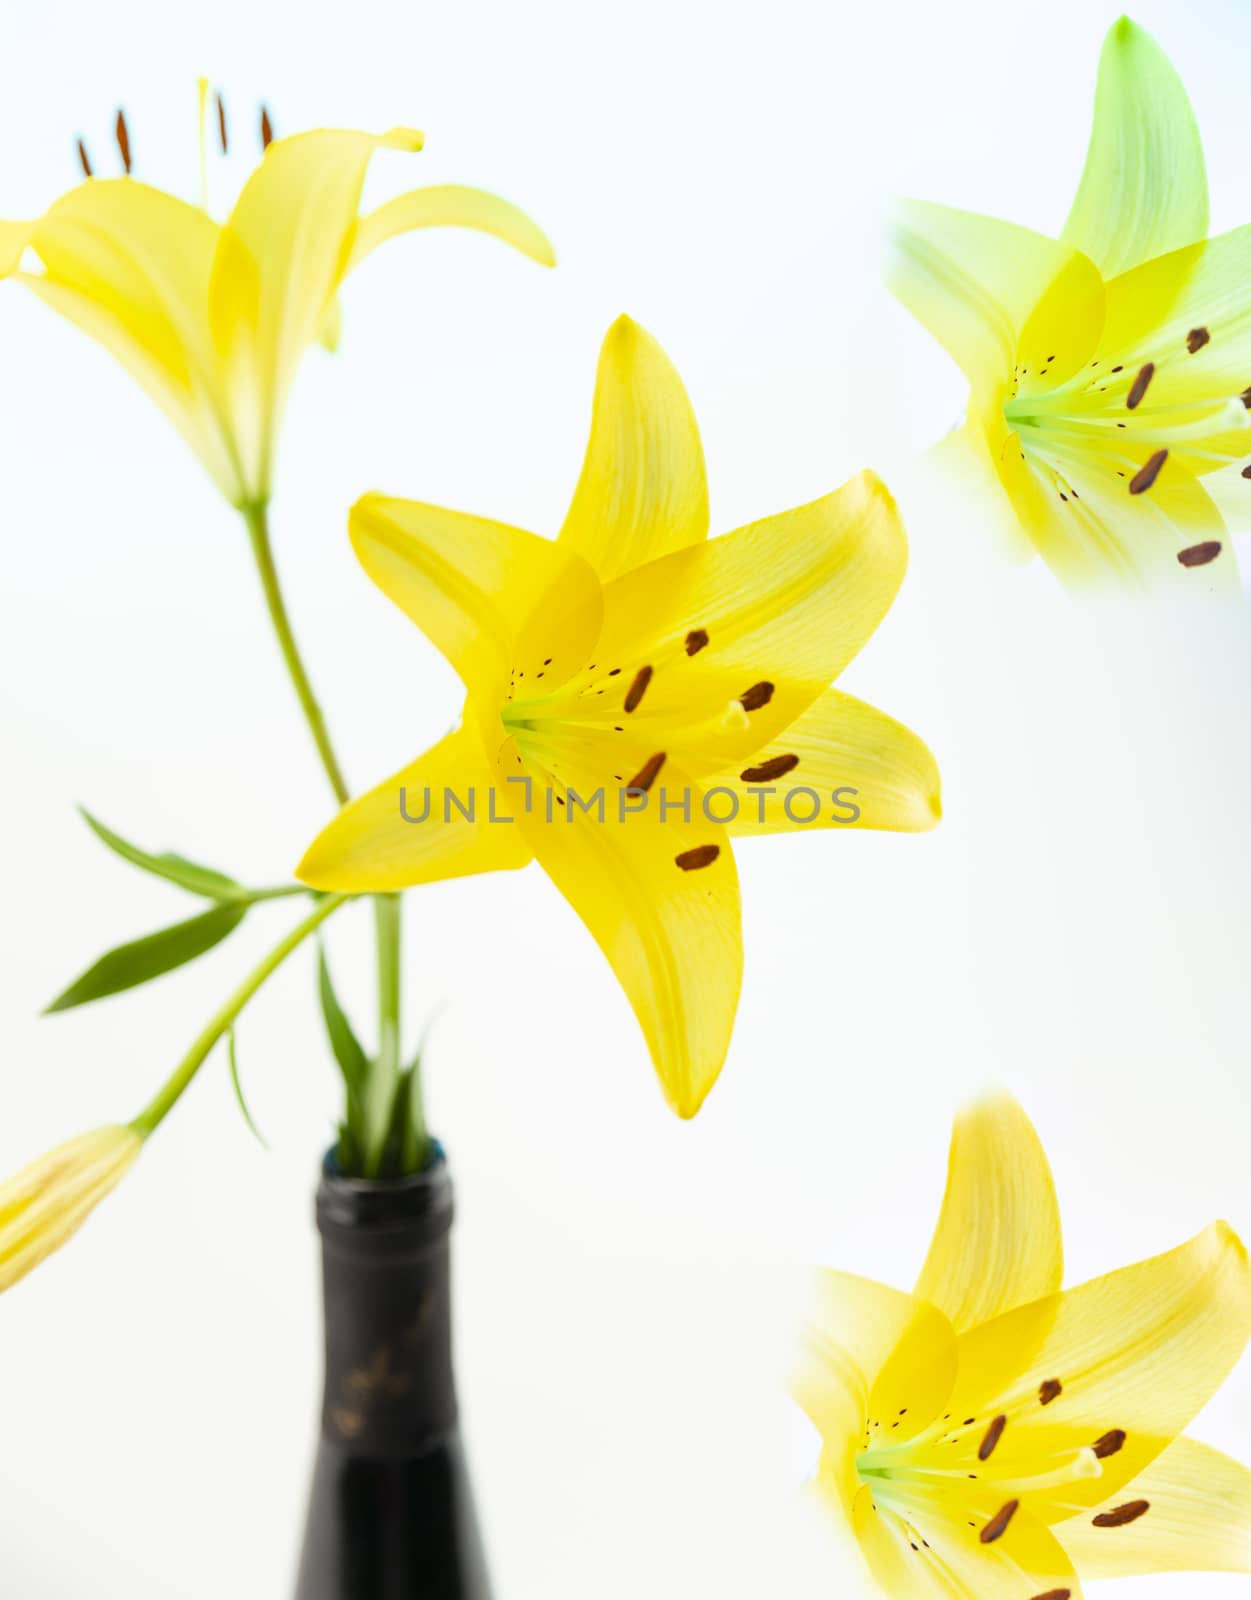 A yellow Asiatic Lily Lillium flower with green stem and leaves on a white background by WittkePhotos